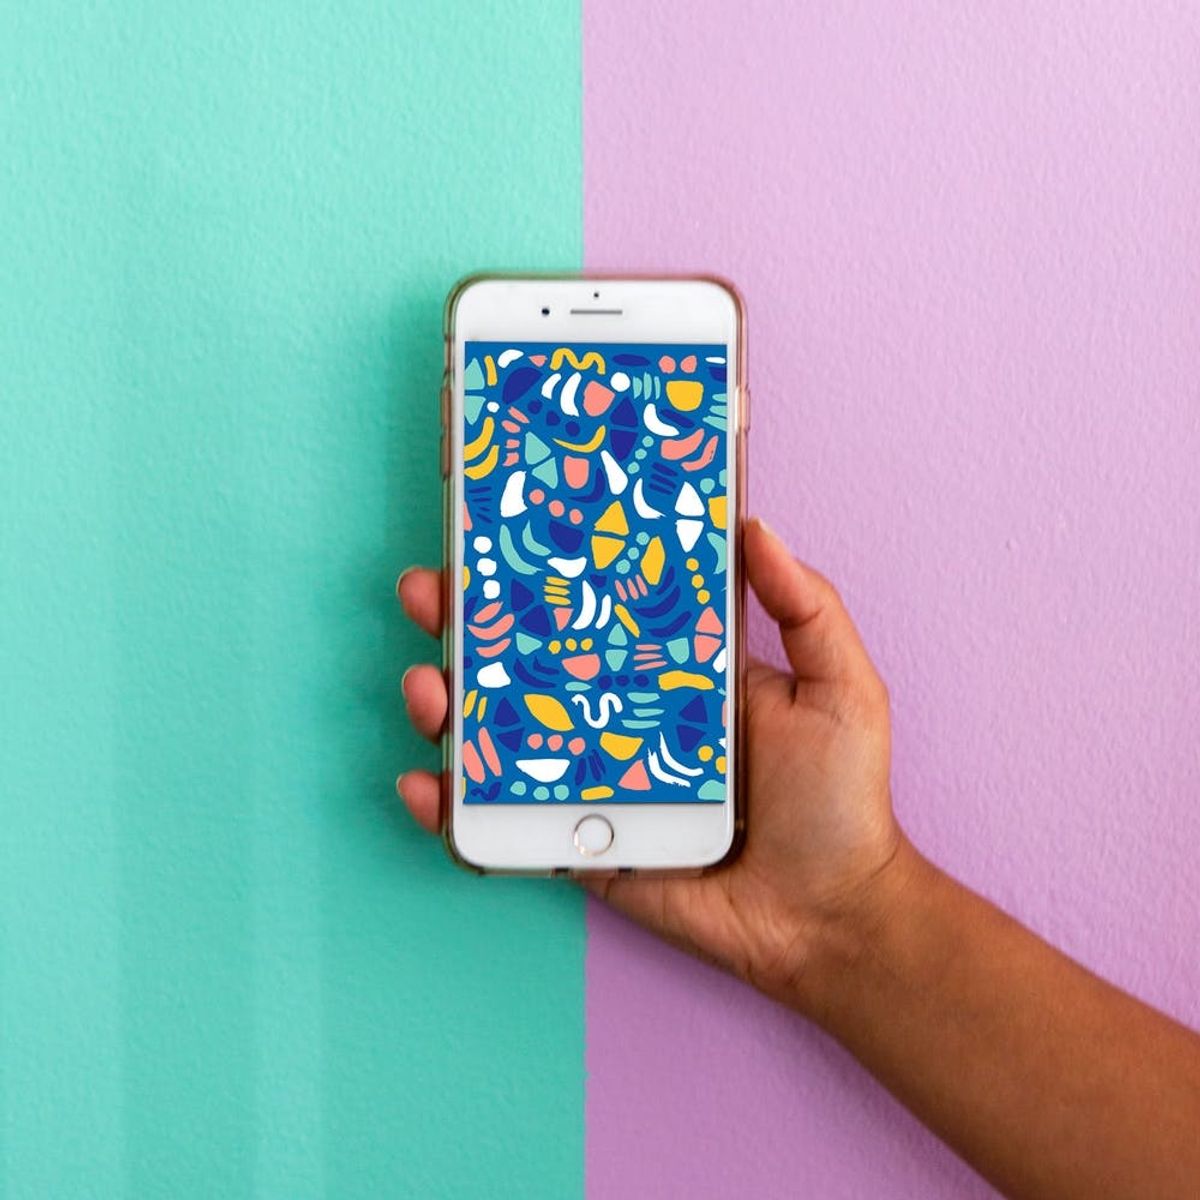 3 Mobile Wallpaper Downloads for People Obsessed with Patterns